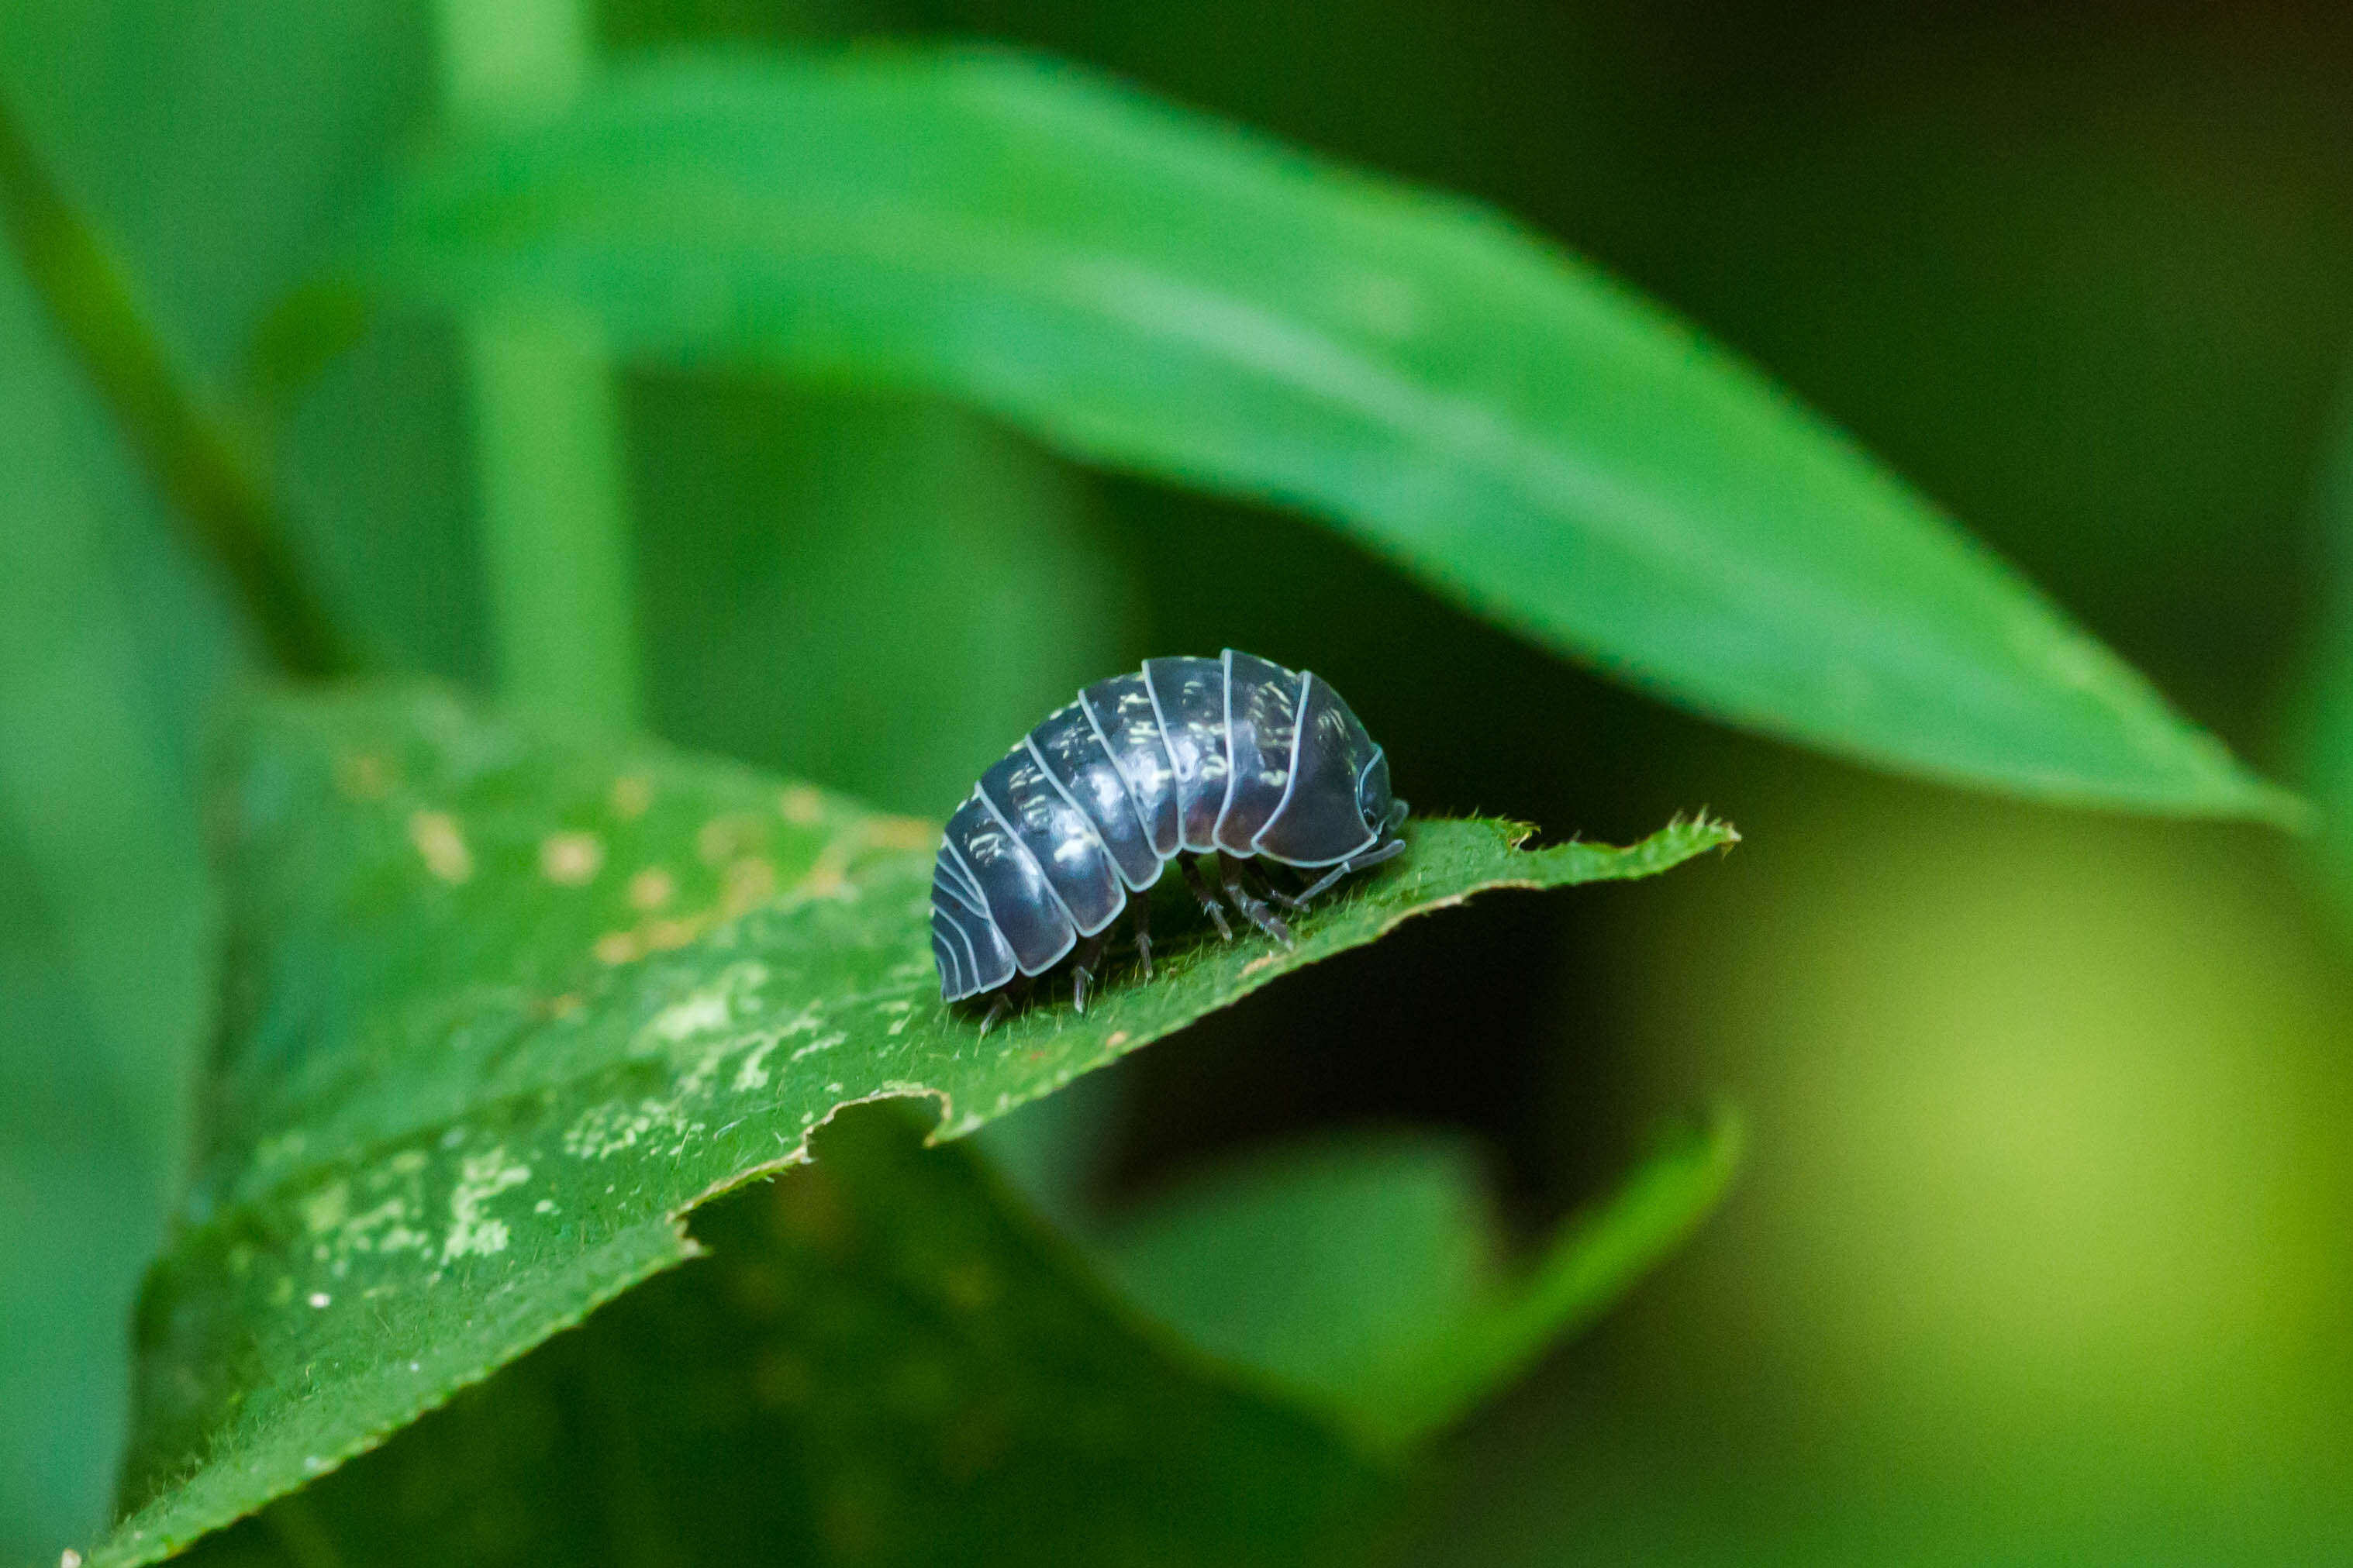 Image of pill bugs